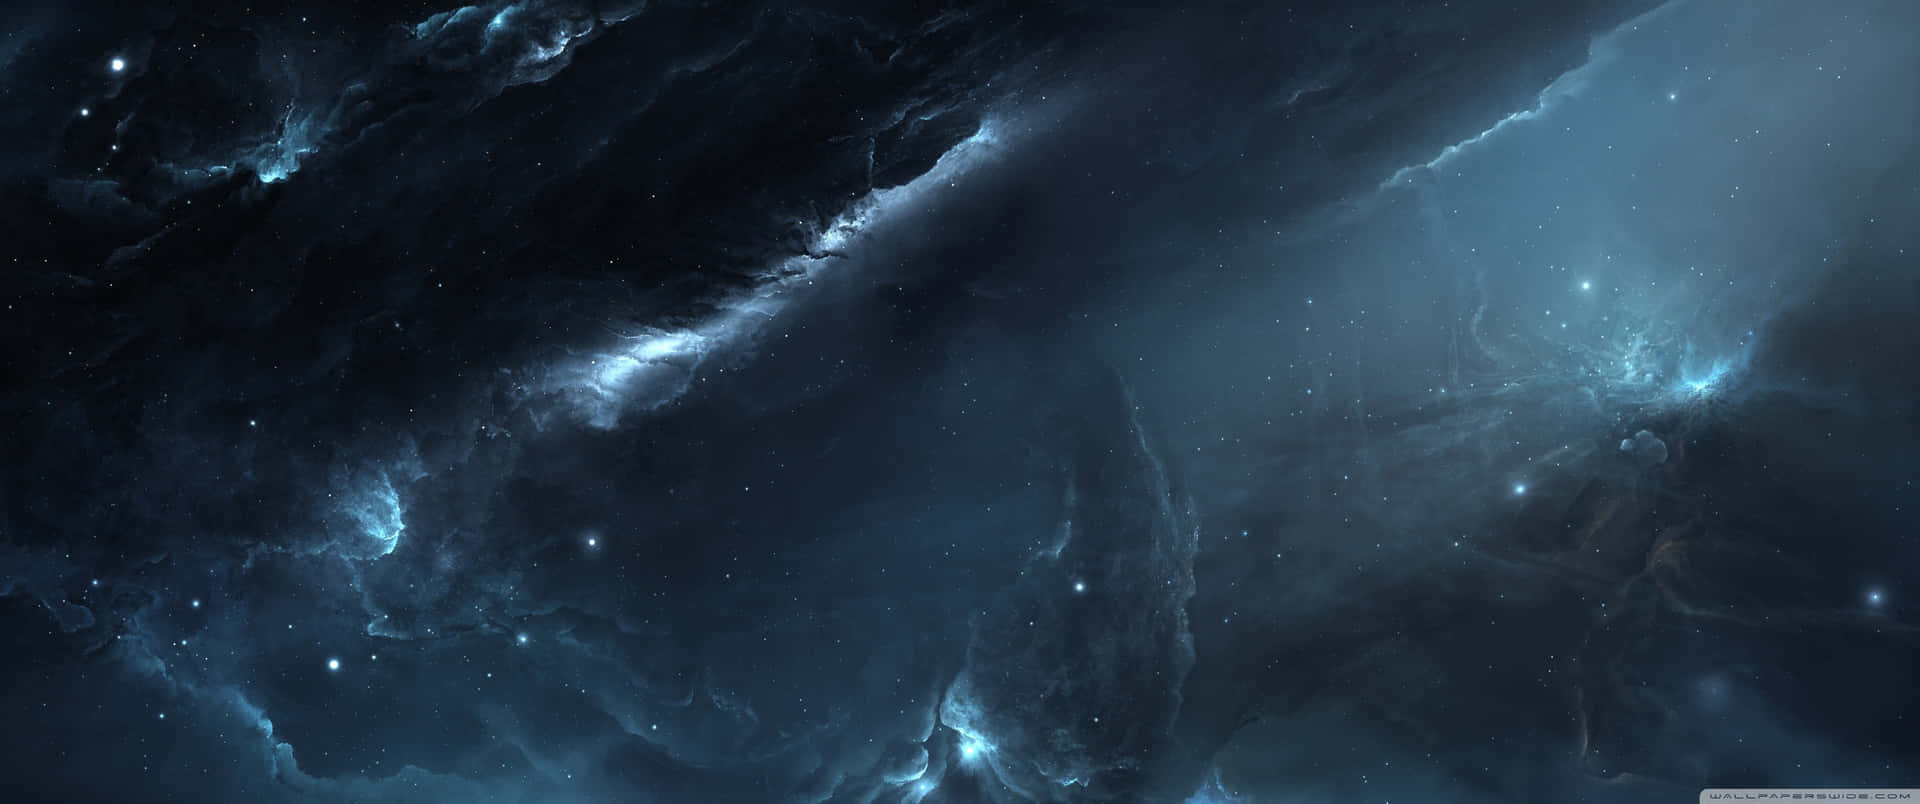 Enjoy a breathtaking view of outer space in Ultra Wide 3440x1440 Wallpaper